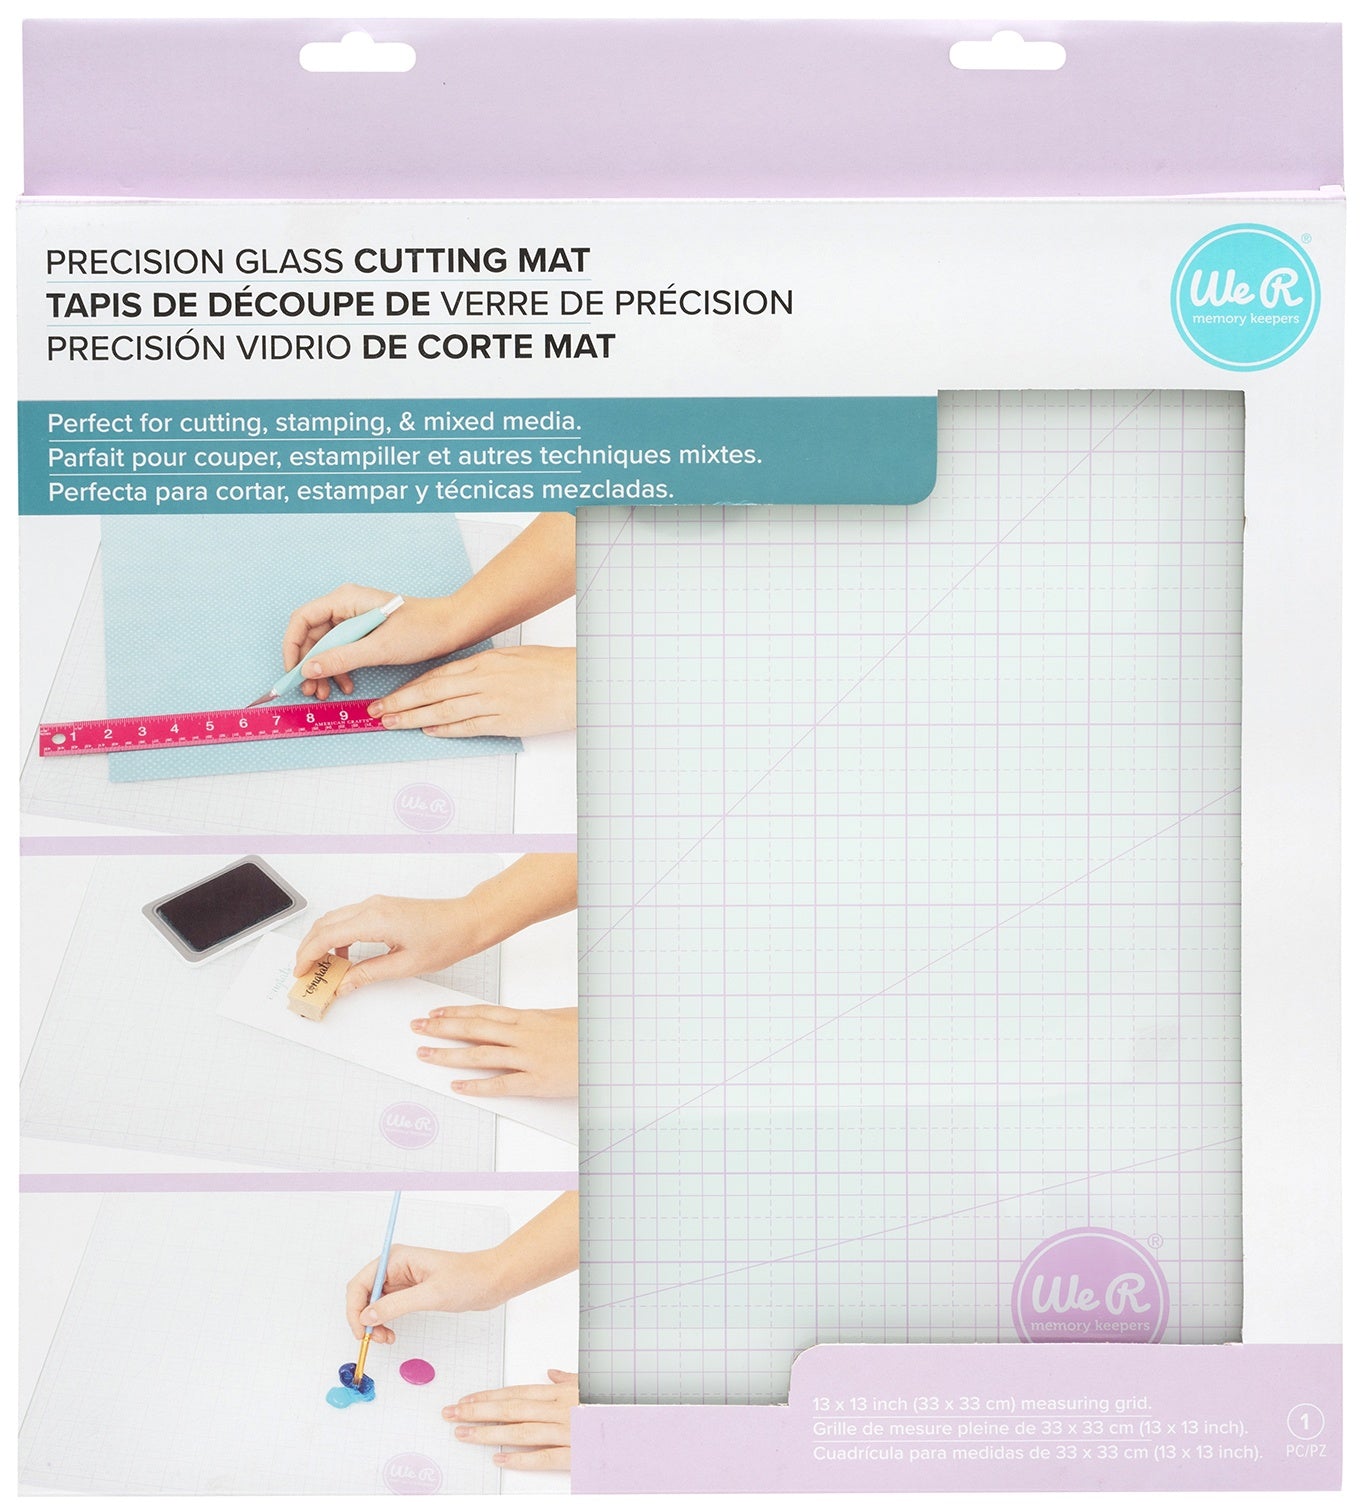 We R Memory Keepers - Precision Glass Cutting Mat - Lilac